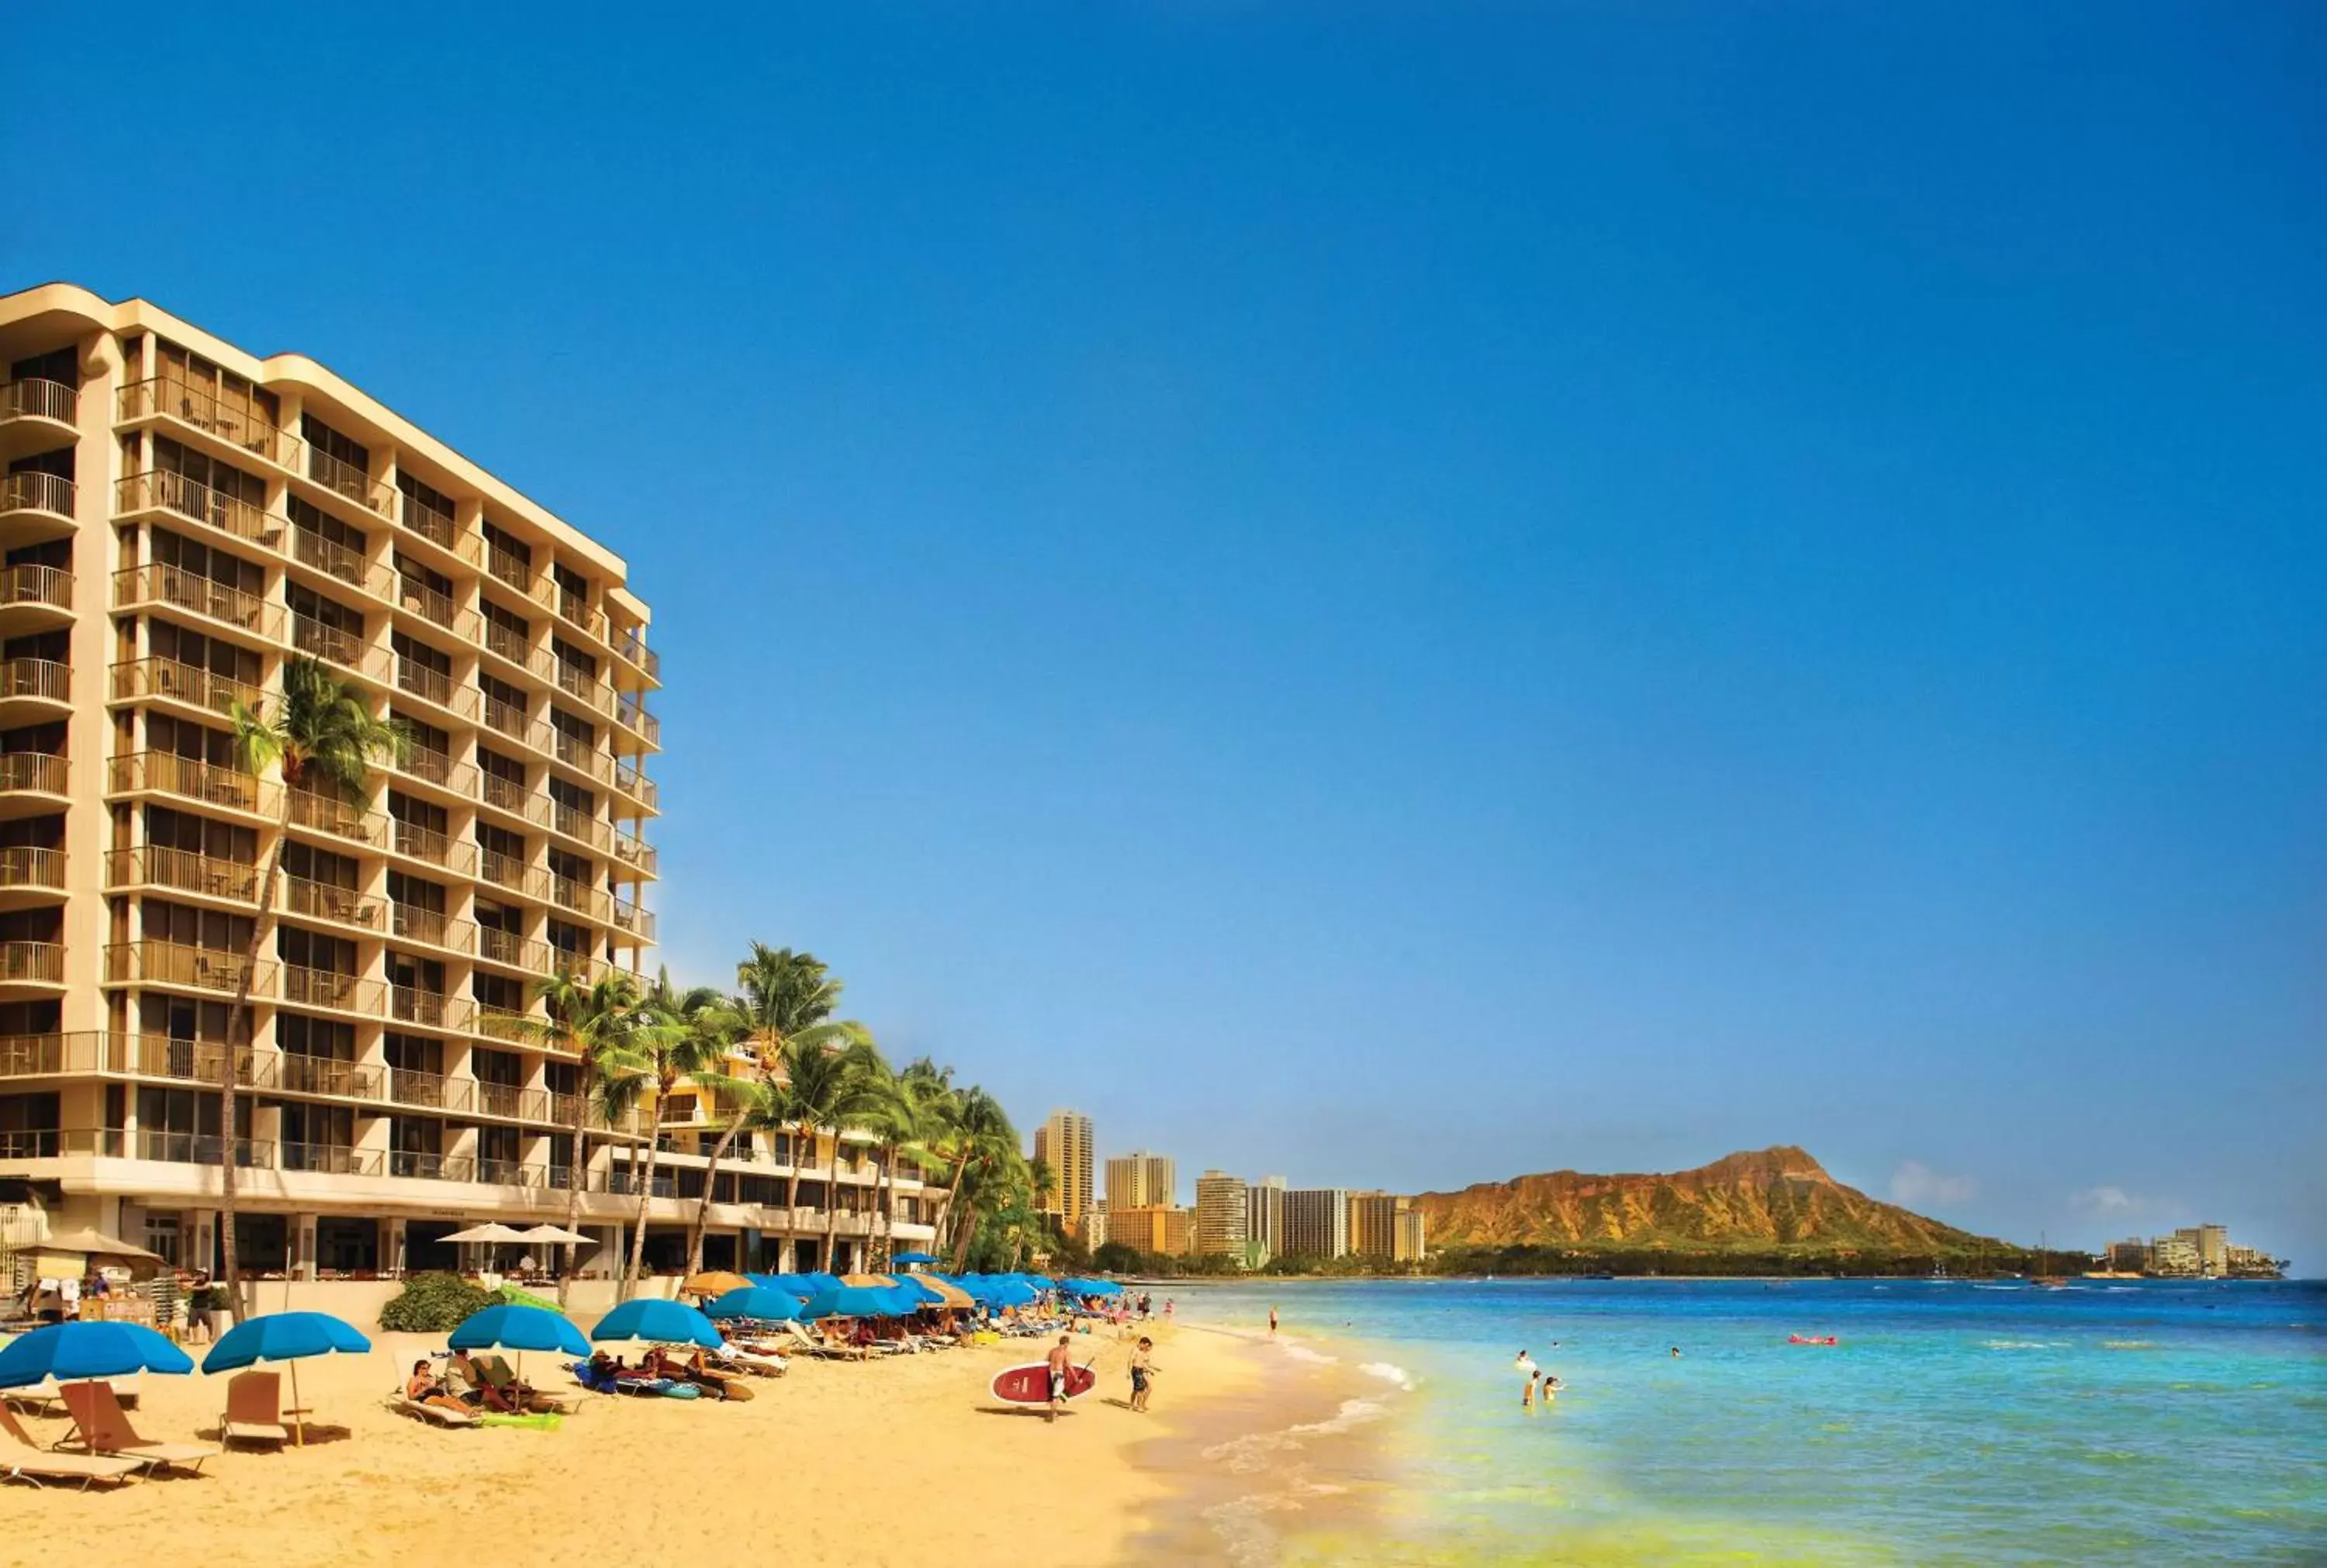 Property building in OUTRIGGER Reef Waikiki Beach Resort